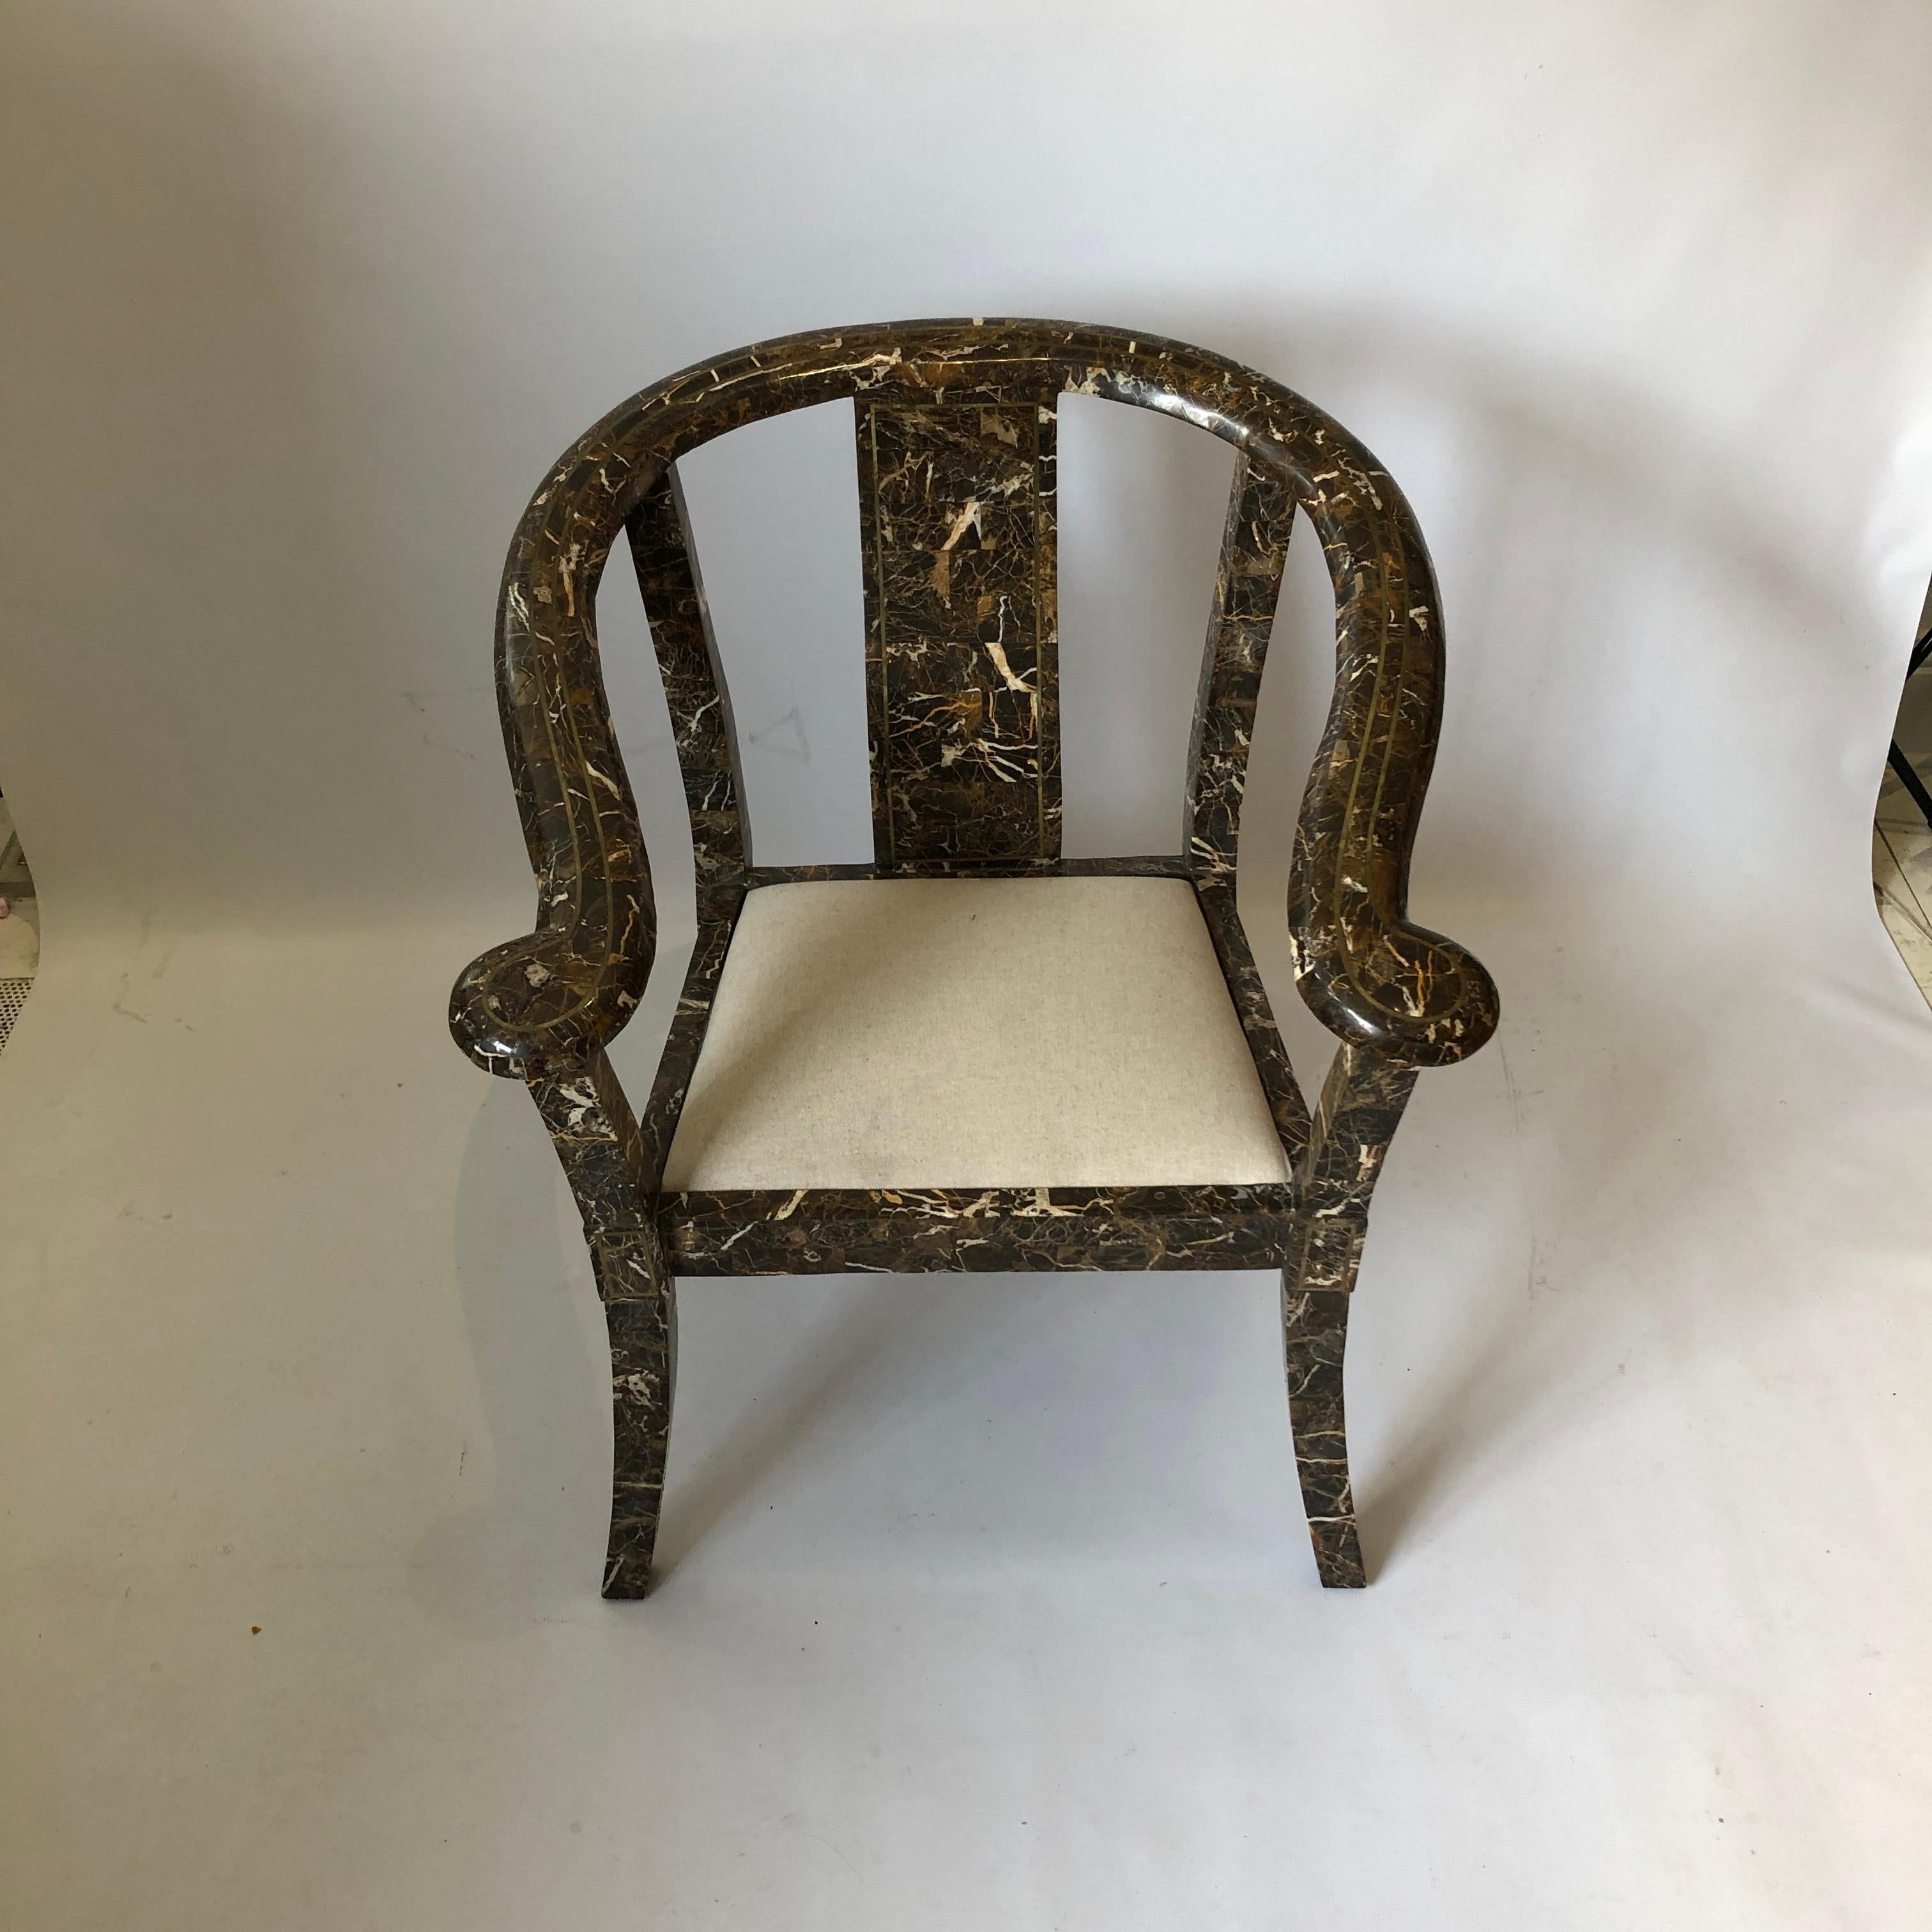 A beautifully 1970s marble carver side chair from Maitland-Smith, the renowned American furniture company. Marble chinoiserie inspired frame with brass inlay and gently curved corners, all finished in a wonderful tessellated black and brown pattern